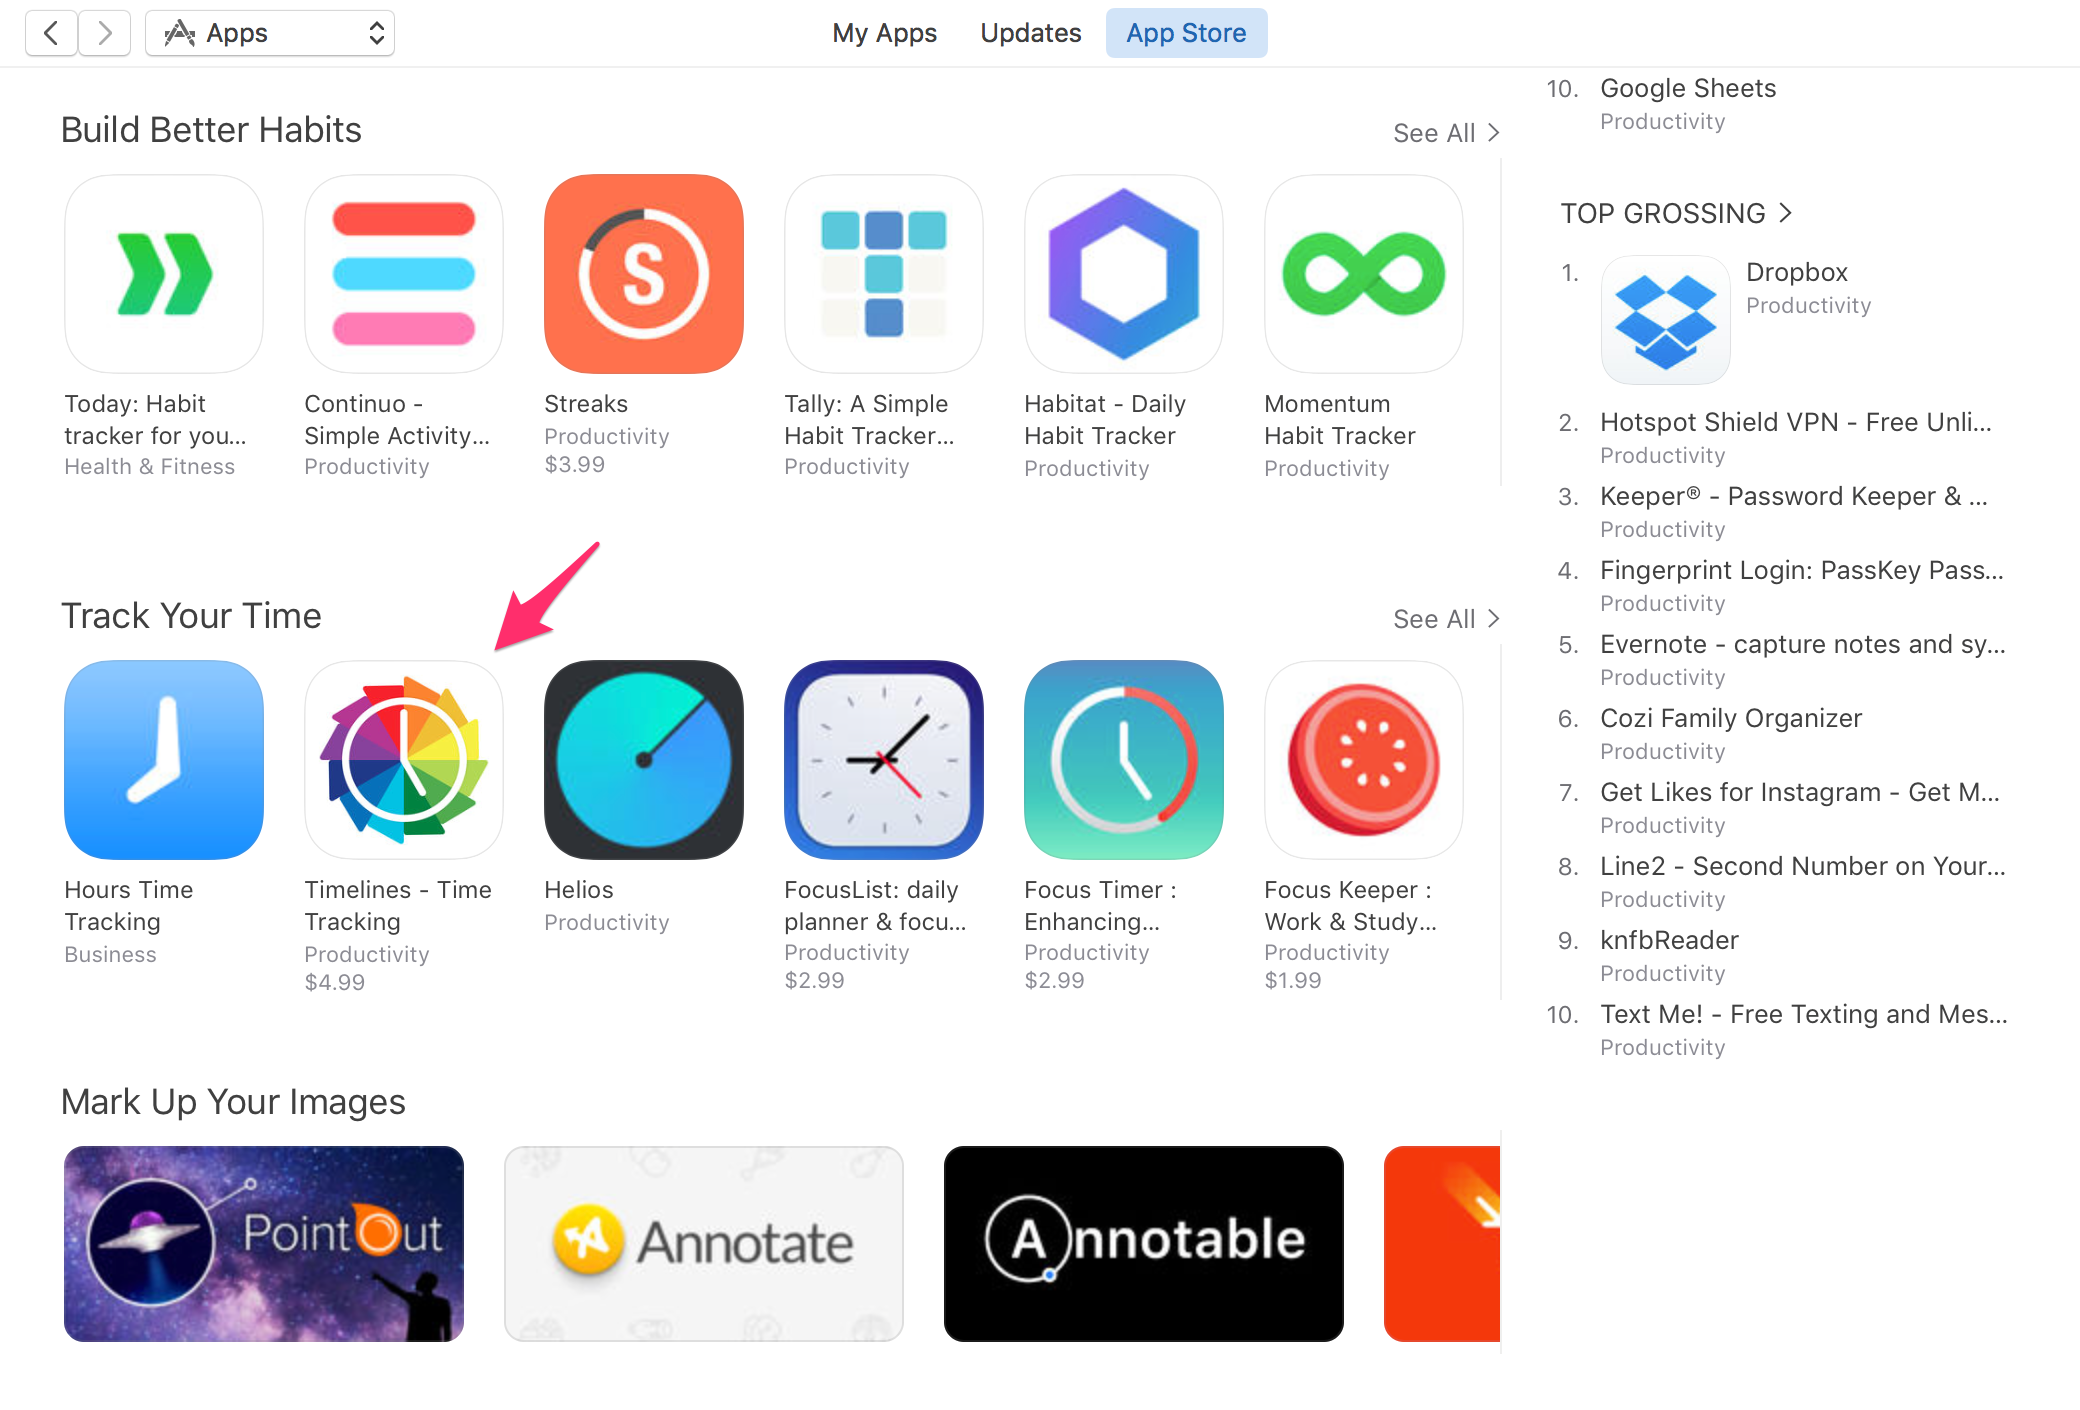 Timelines featured on the App Store Productivity category Track your time section